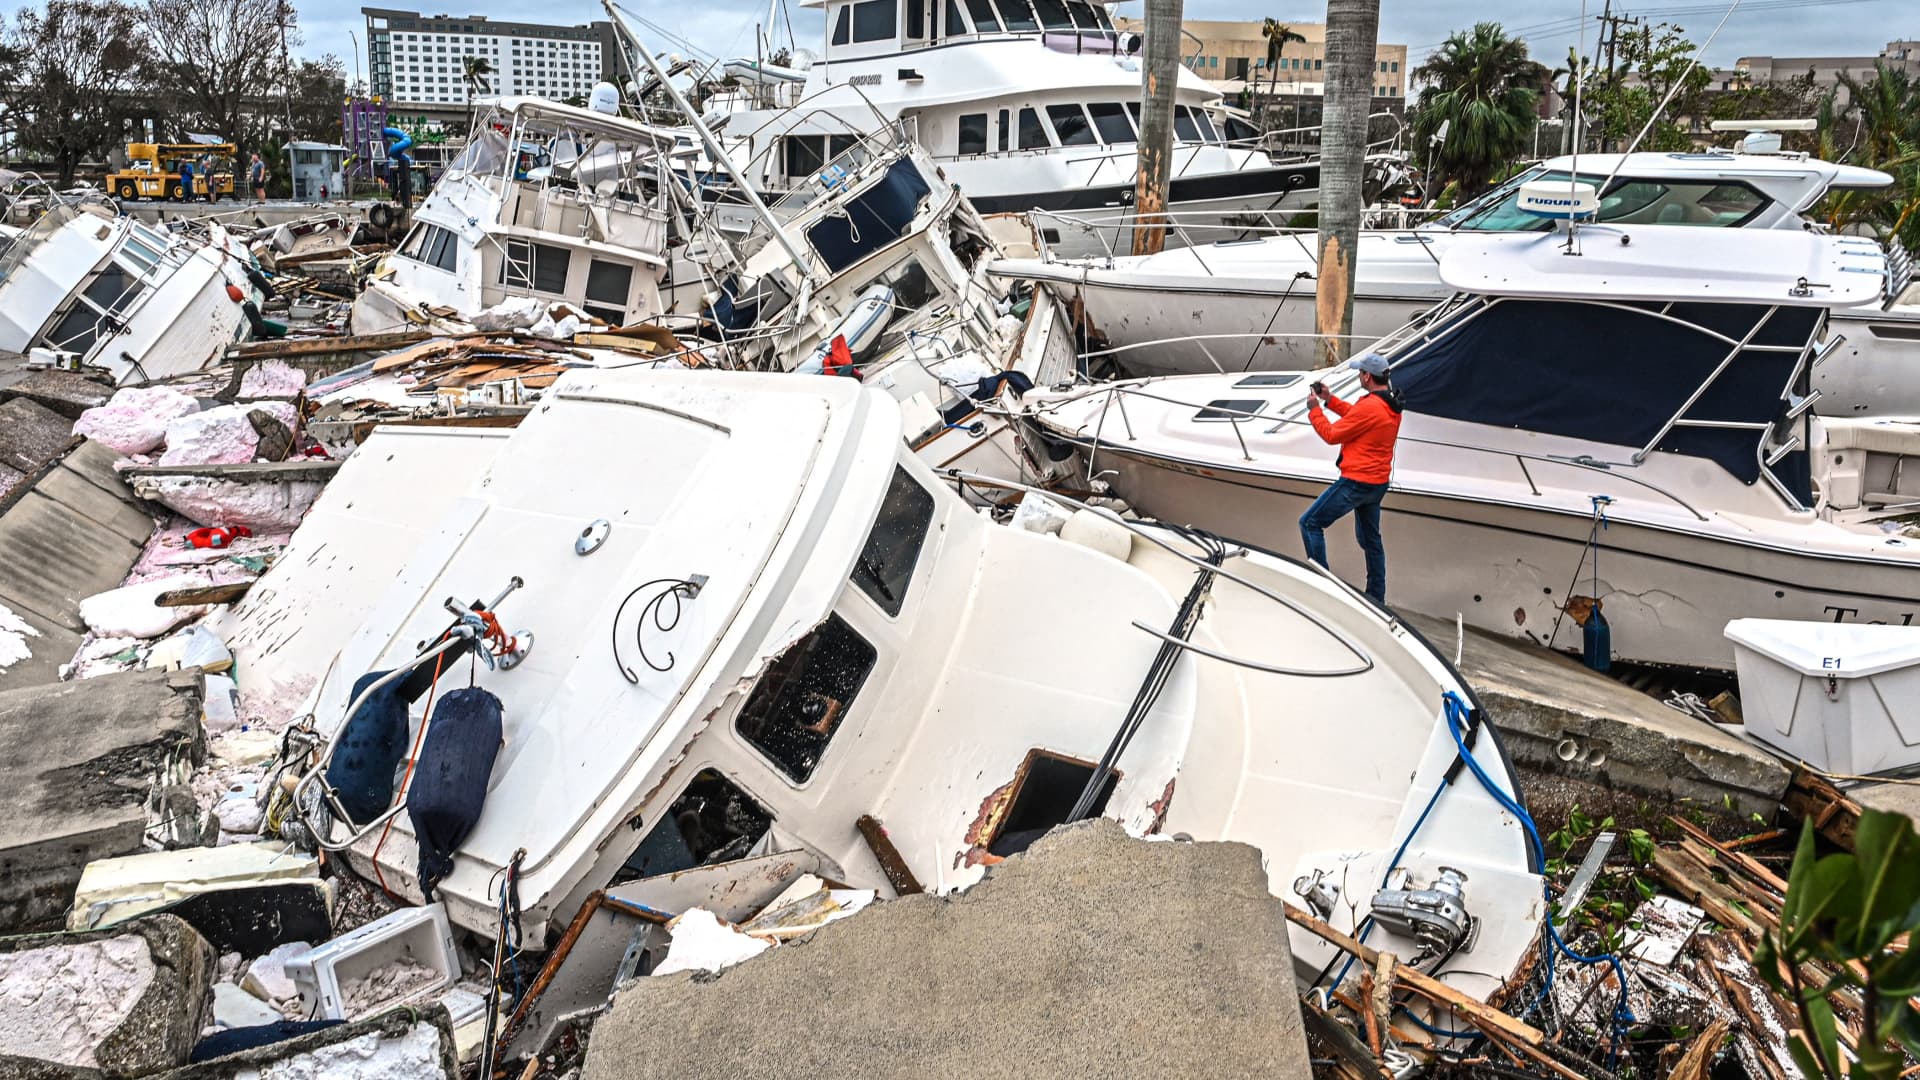 A man takes photos of boats damaged by Hurricane Ian in Fort Myers, Florida, on September 29, 2022.